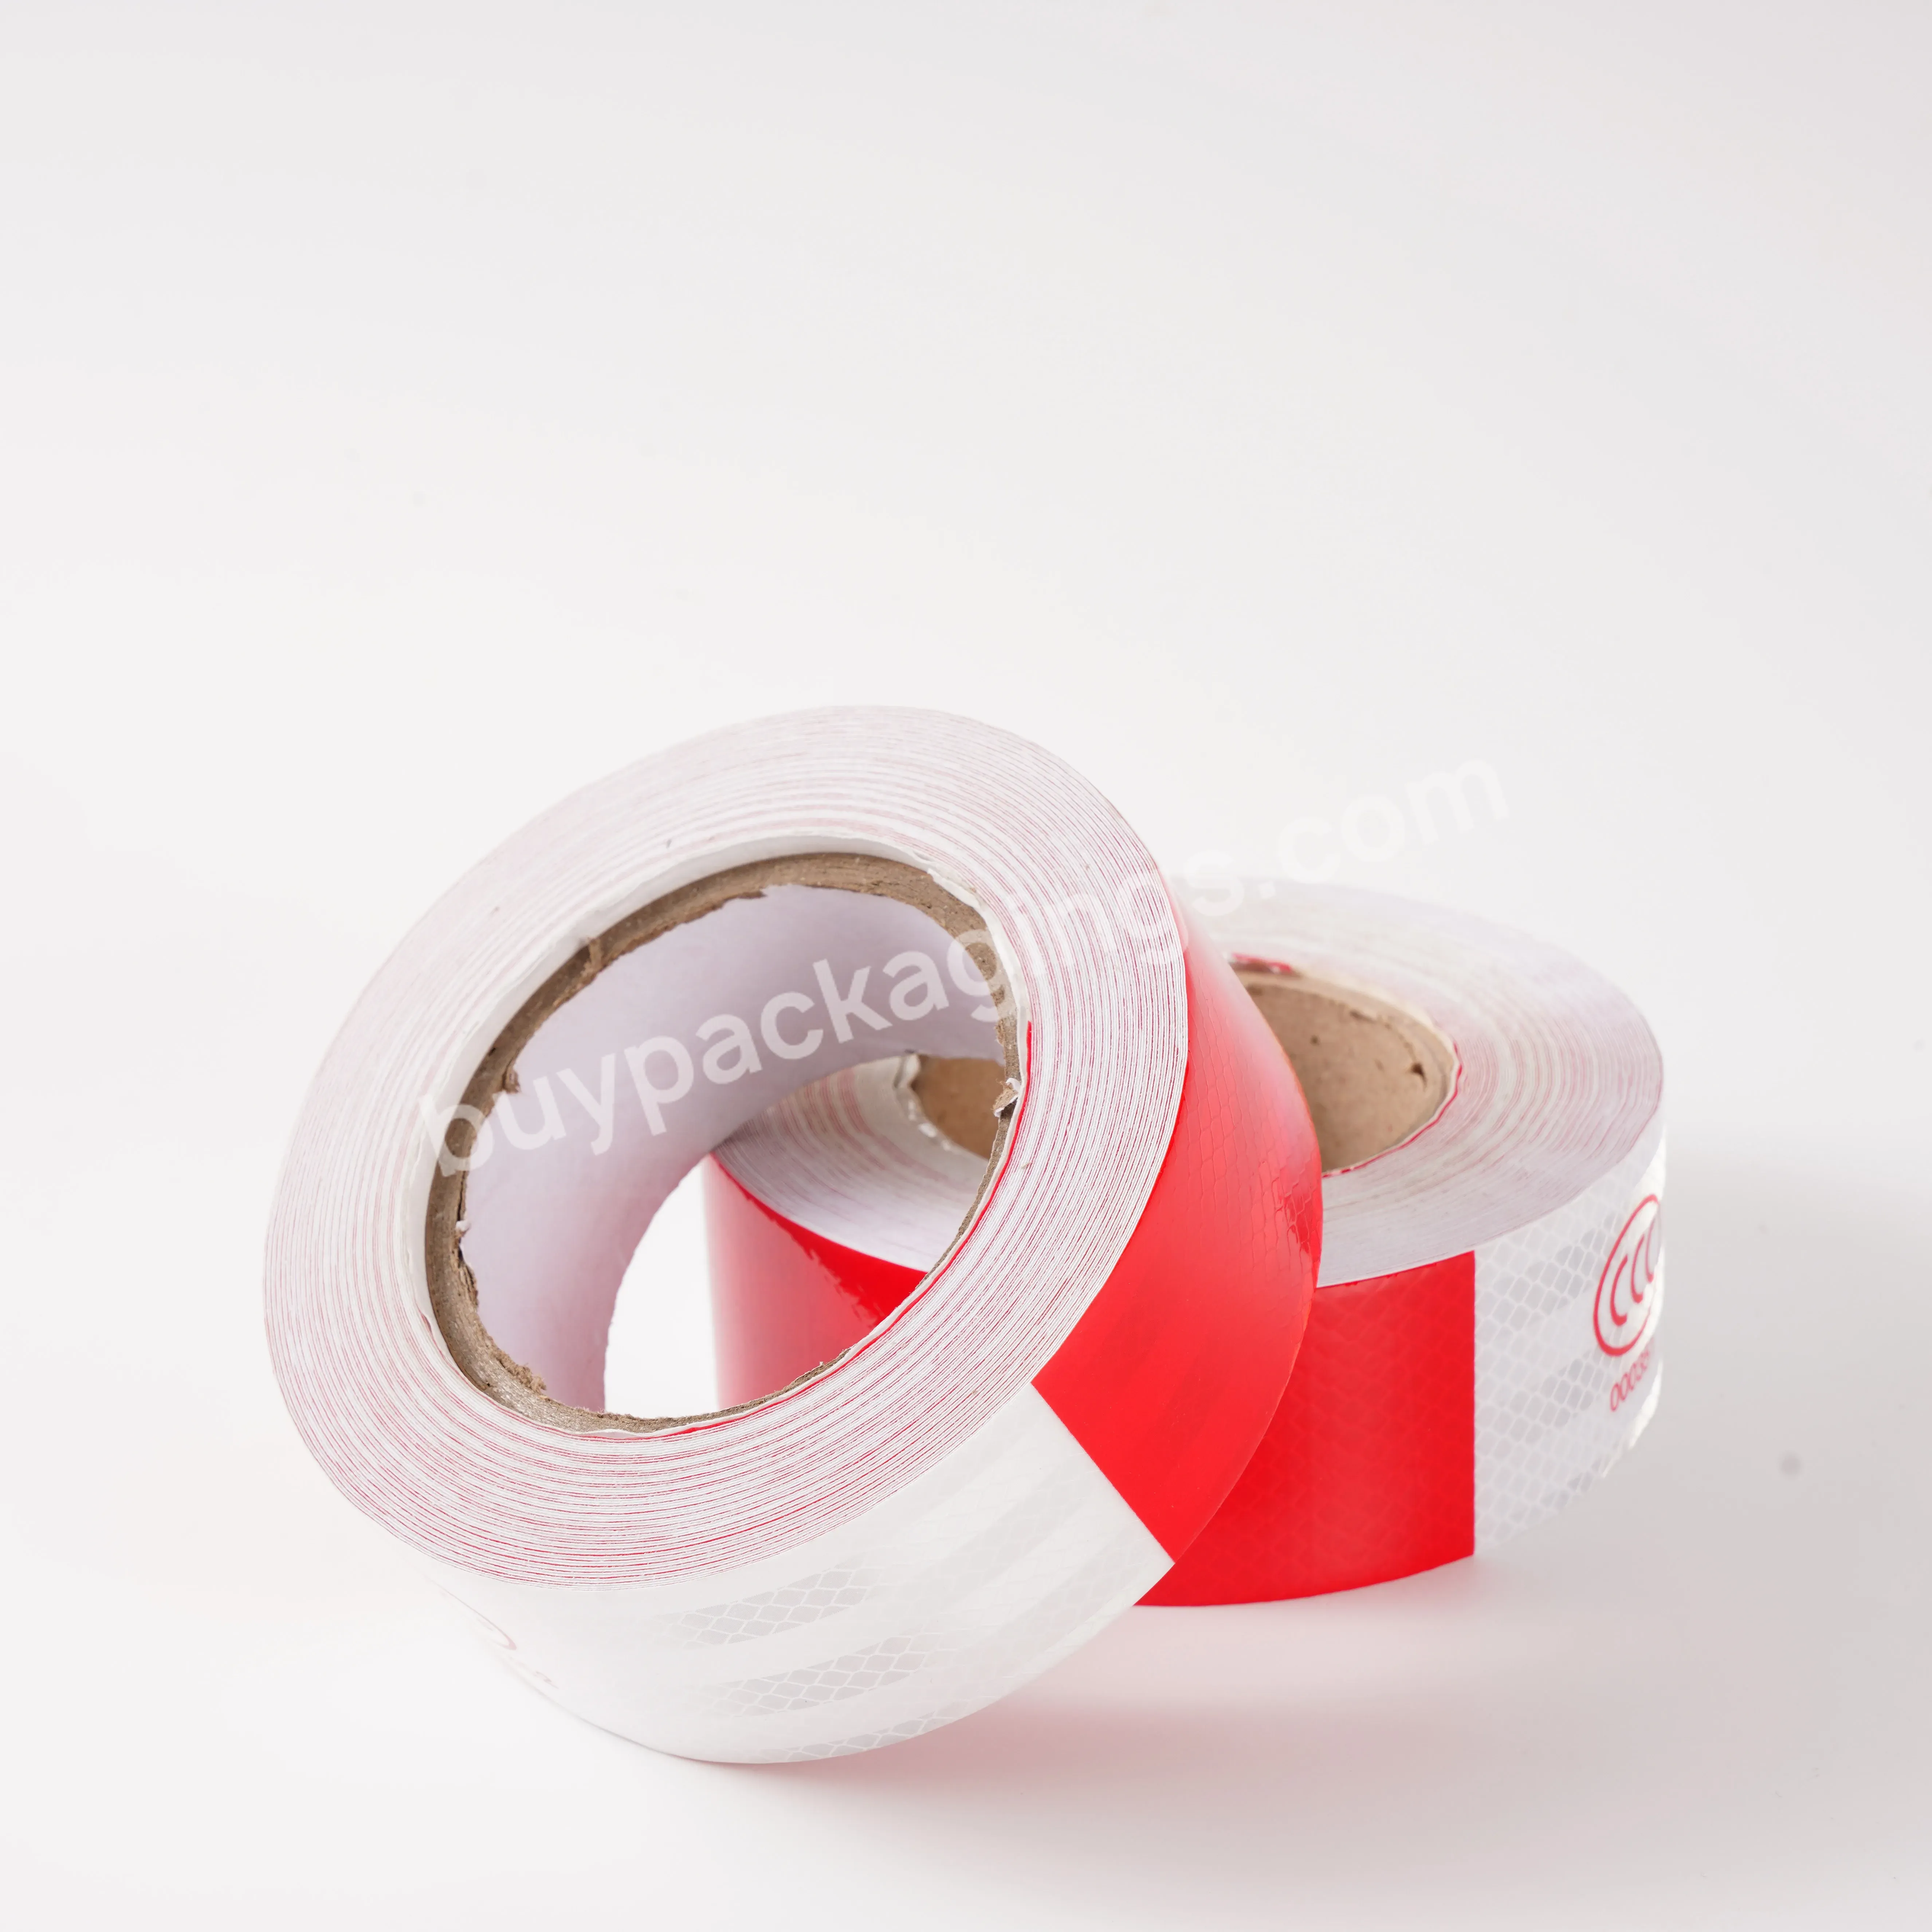 Red And White Reflective Warning Reflective Material Tape For Vehicle Driving - Buy Conspicuous Vehicle Reflective Tape Product,Reflective Tape For Car,Adhesive Reflective Tape.